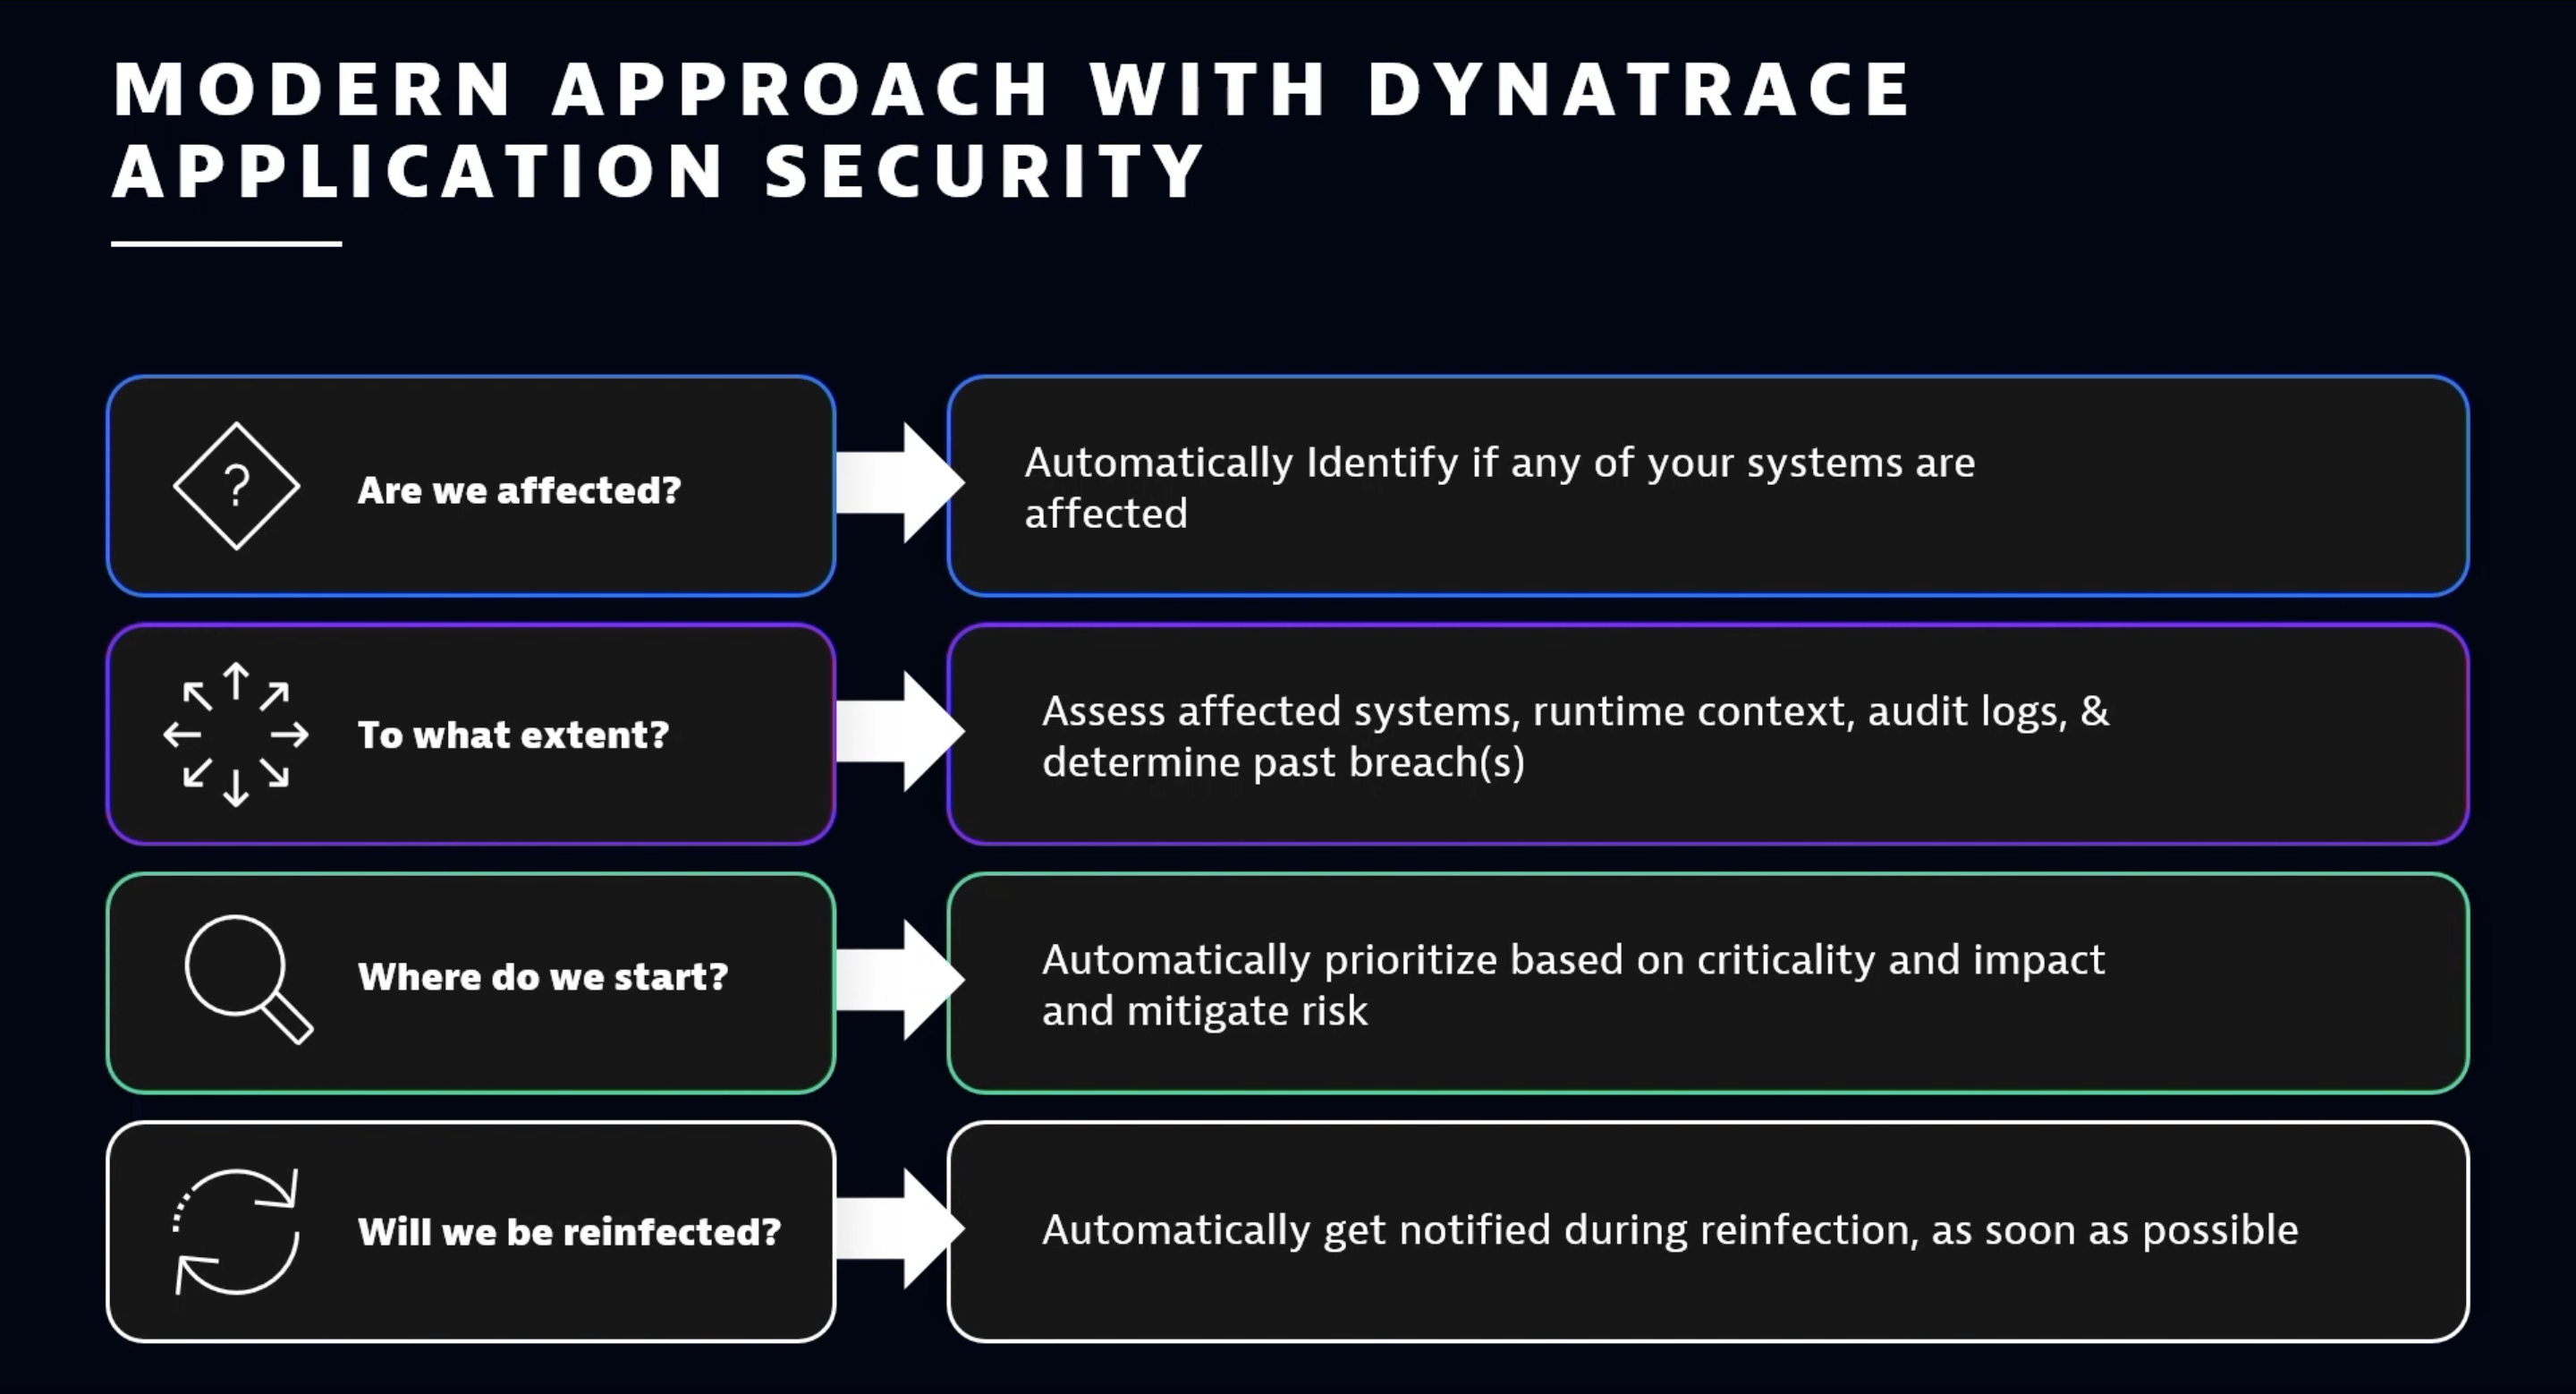 Modern approach with Dynatrace application security